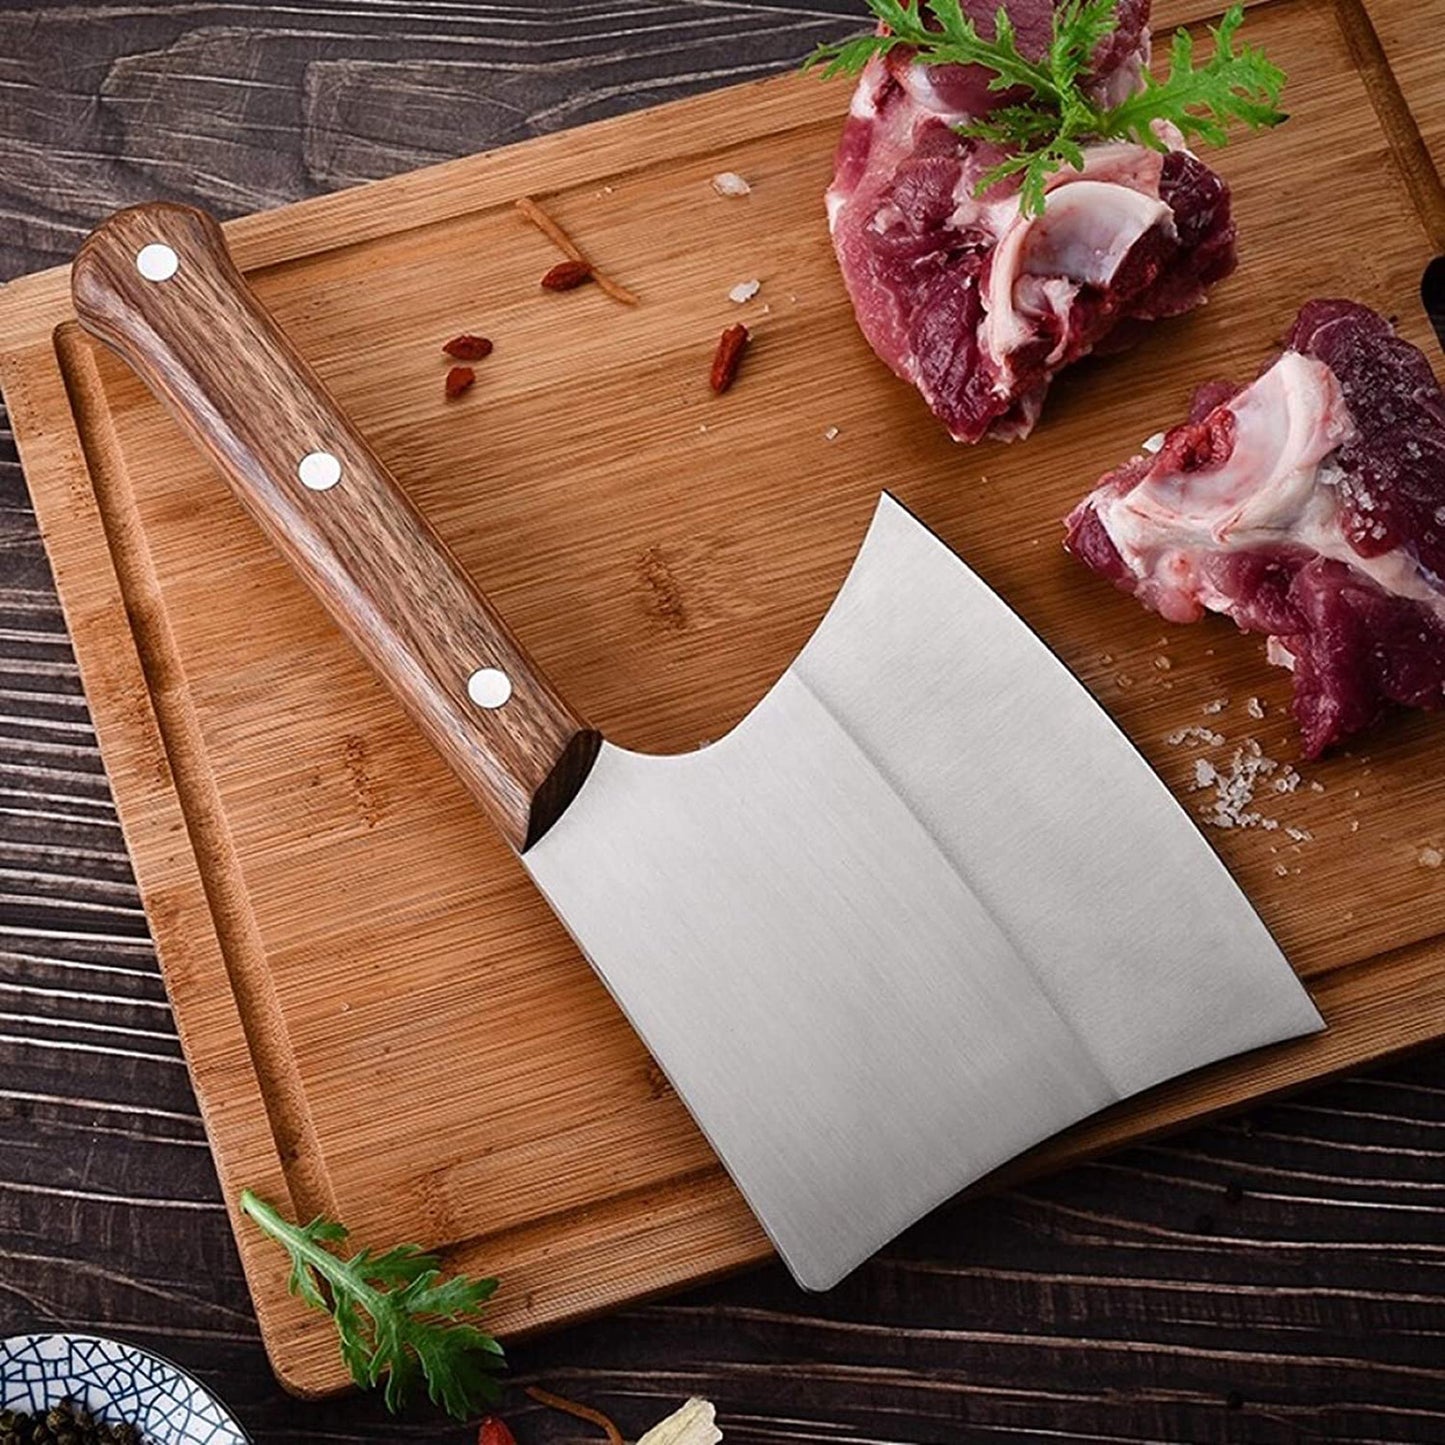 Kitory Heavy Duty Meat Cleaver Full Tang Wooden Handle